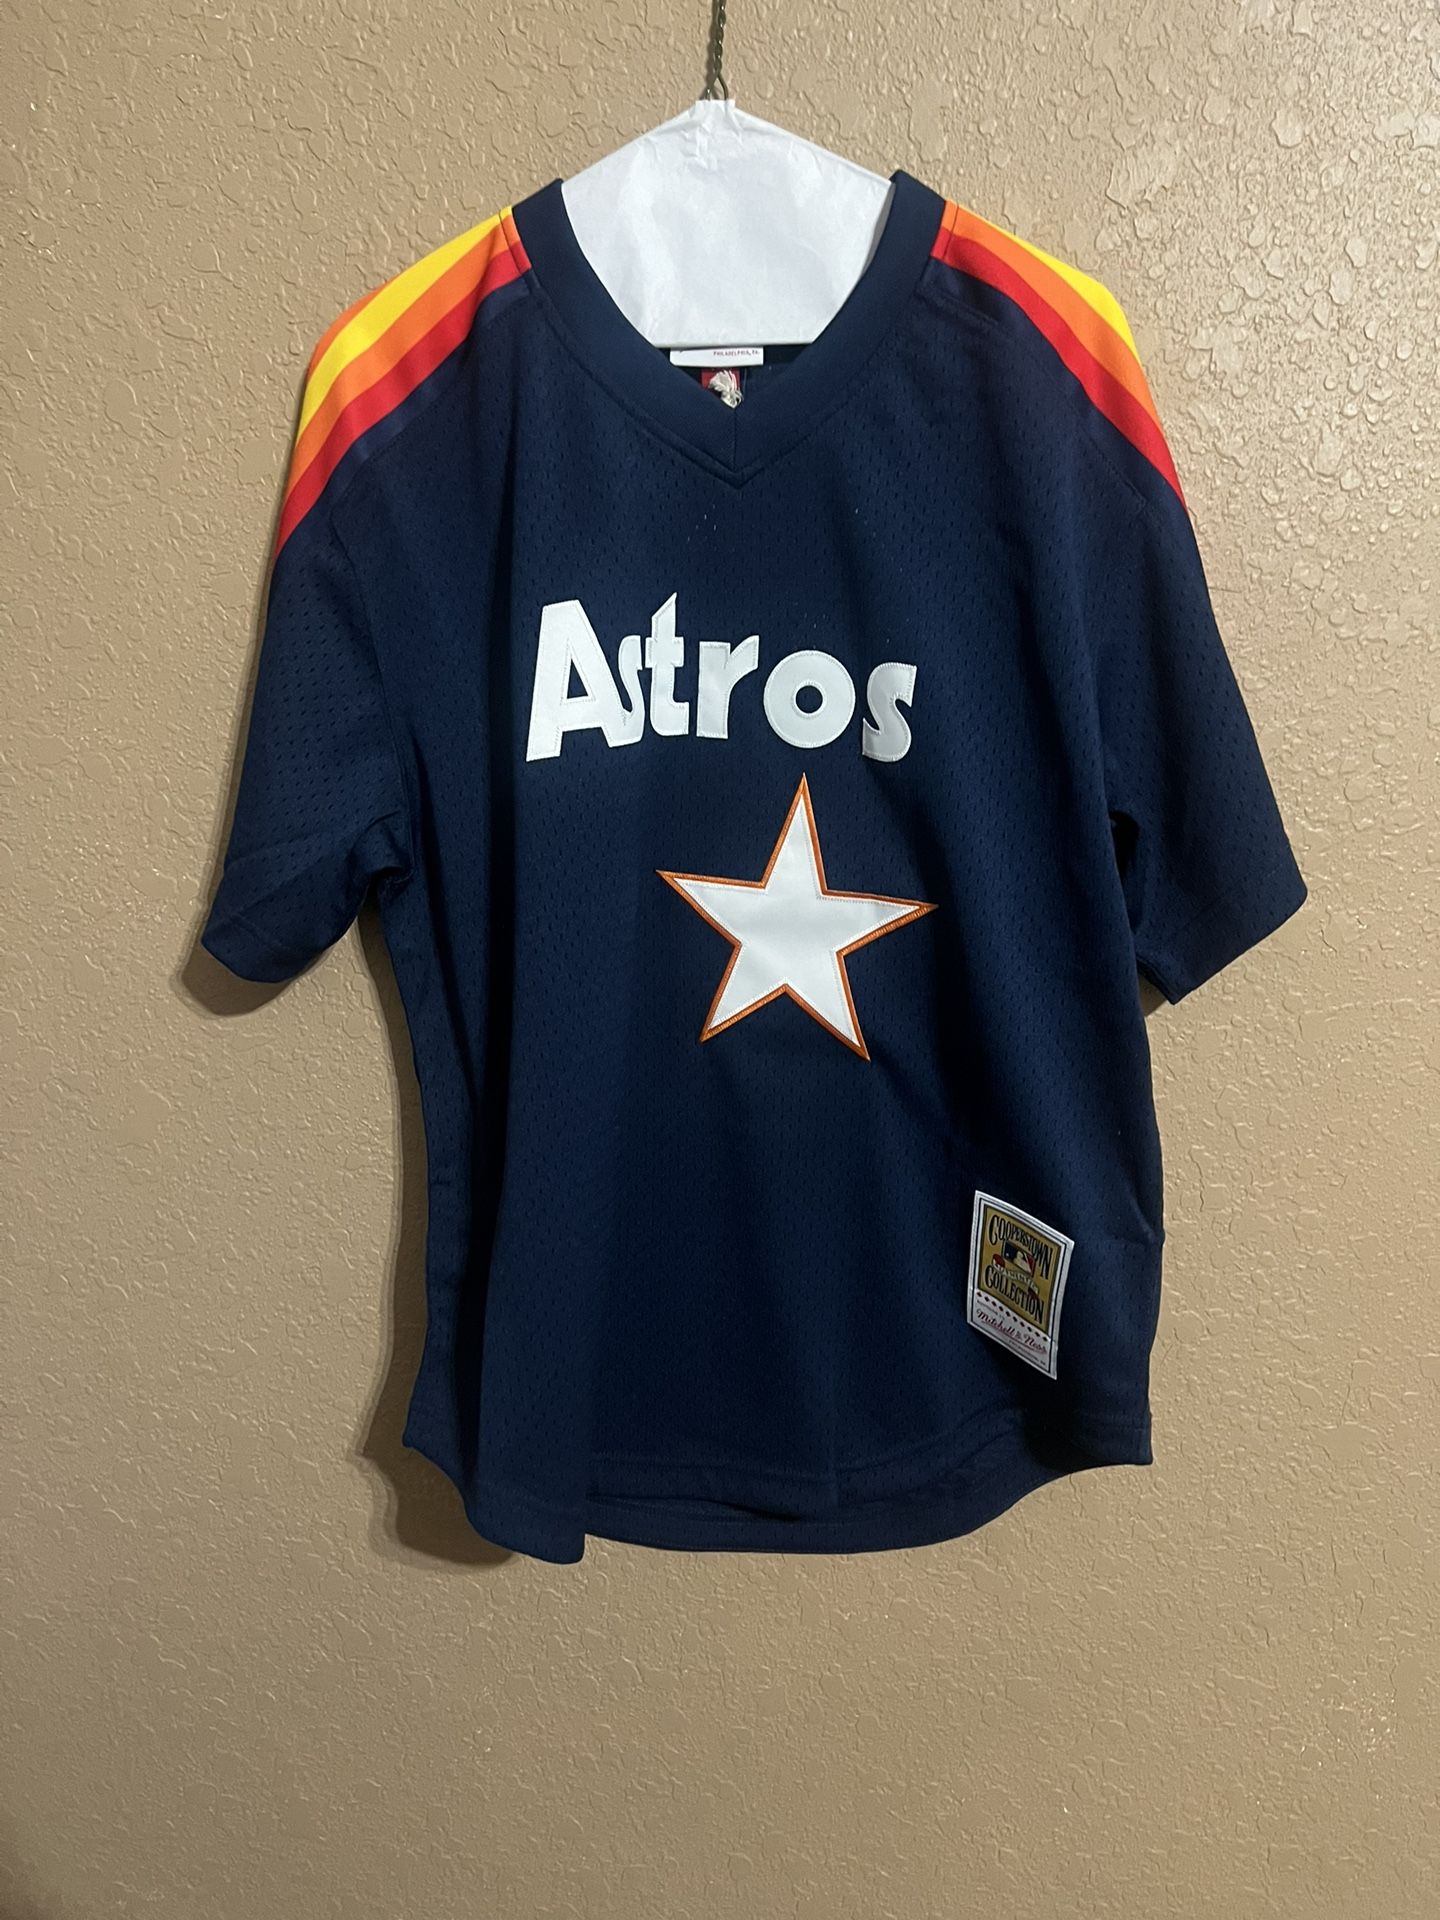 Authentic Houston Astros 'Ryan' Jersey (sz. 2x) for Sale in Humble